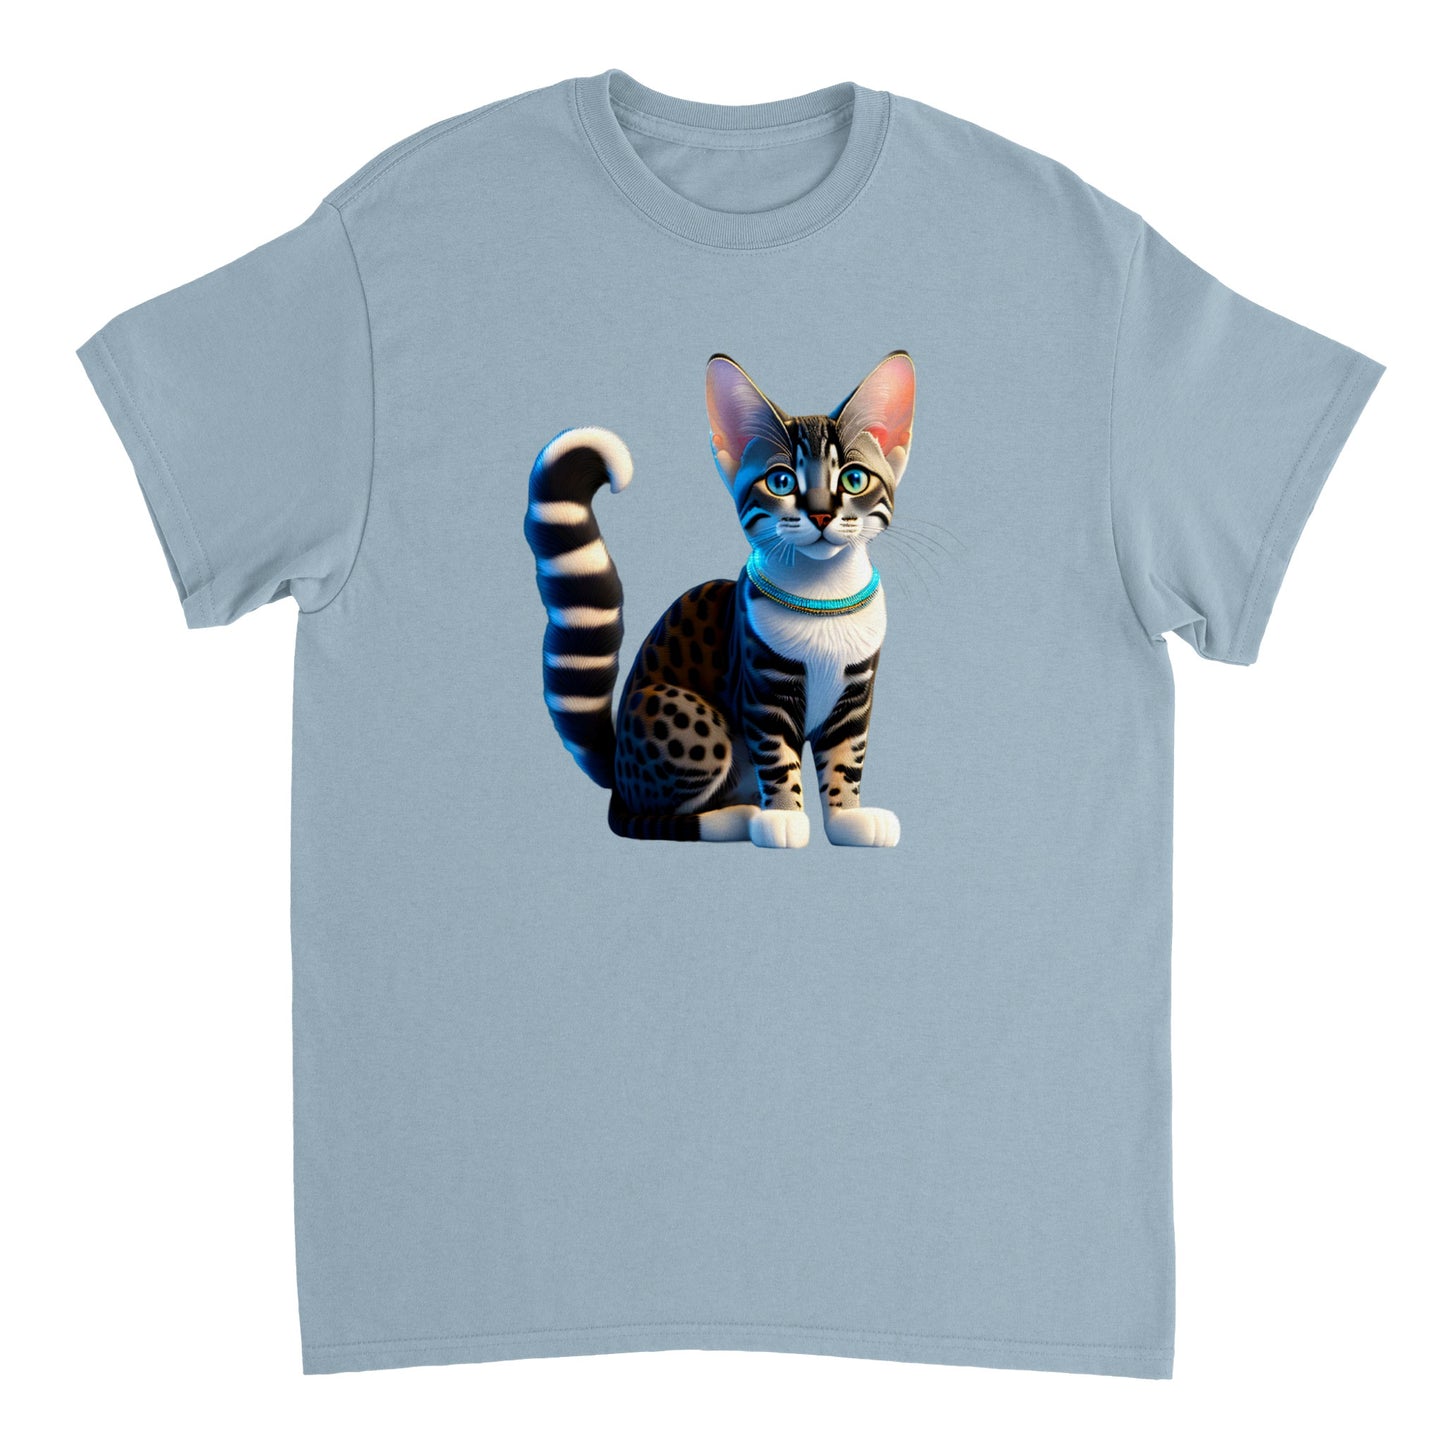 Adorable, Cool, Cute Cats and Kittens Toy - Heavyweight Unisex Crewneck T-shirt 23